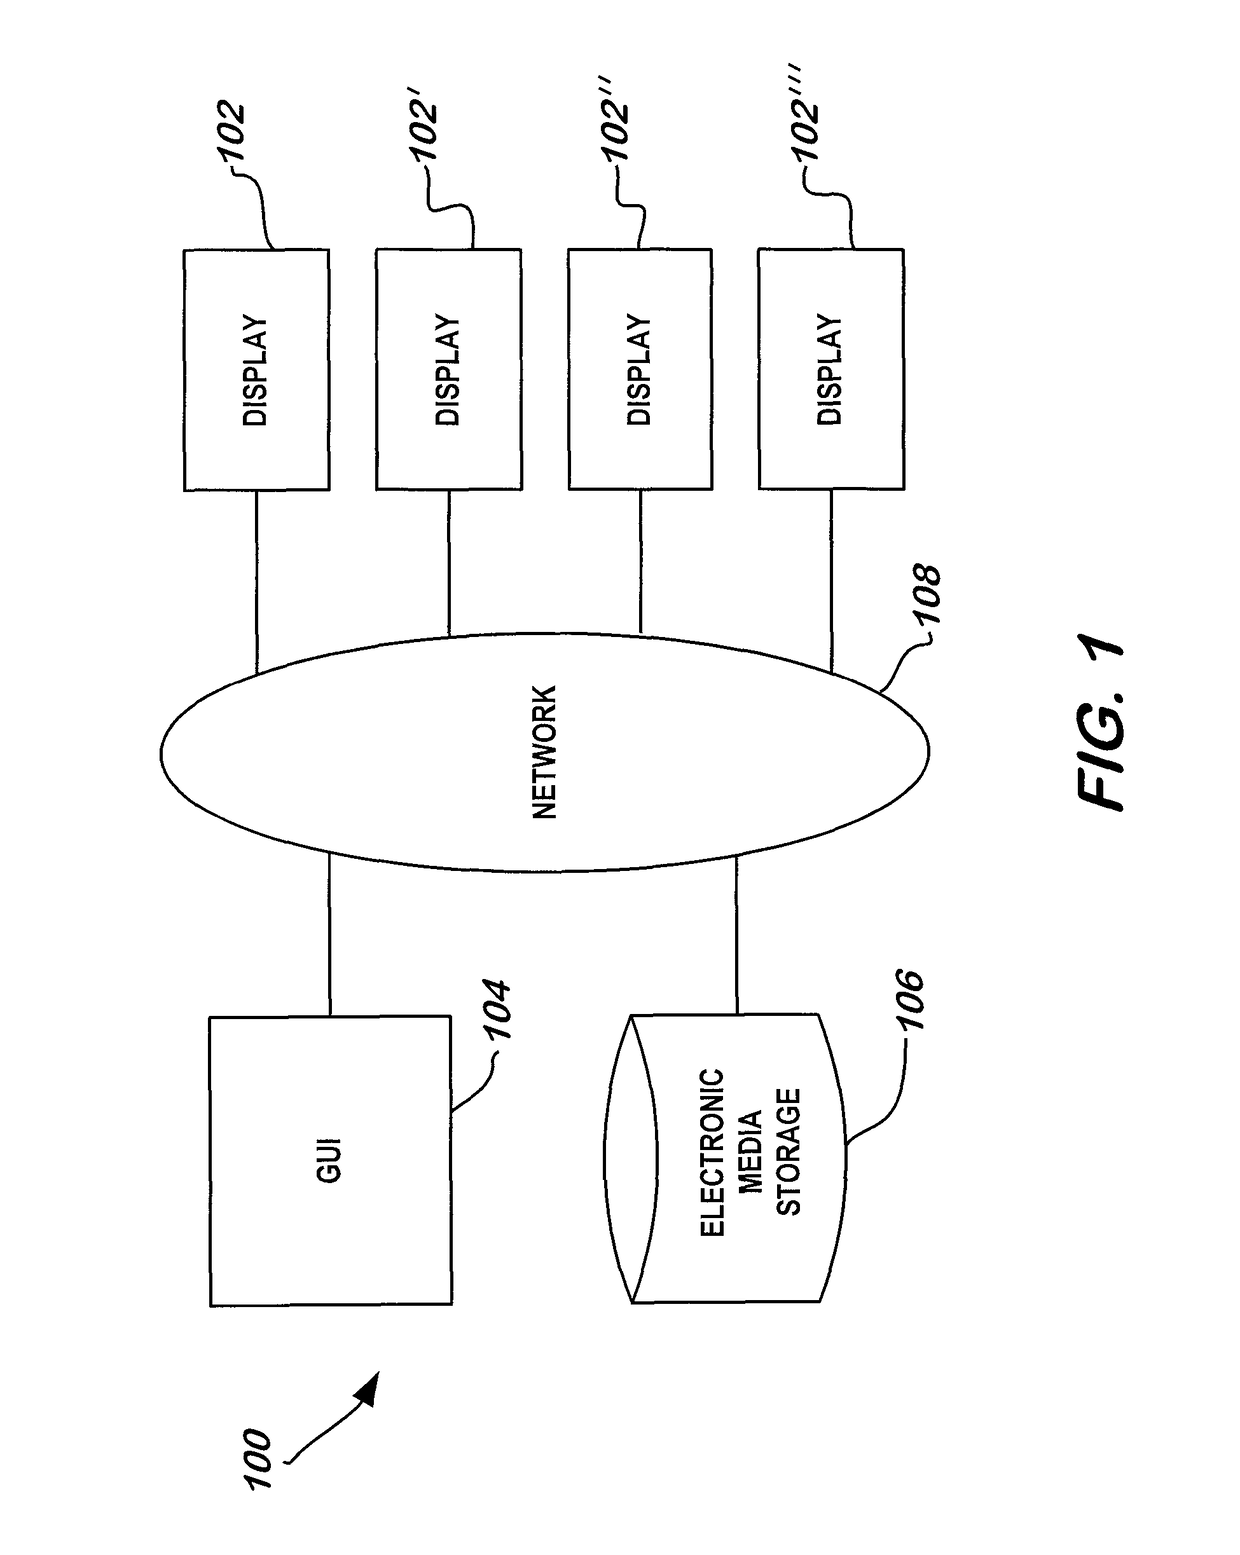 System and method for controlling the distribution of electronic media